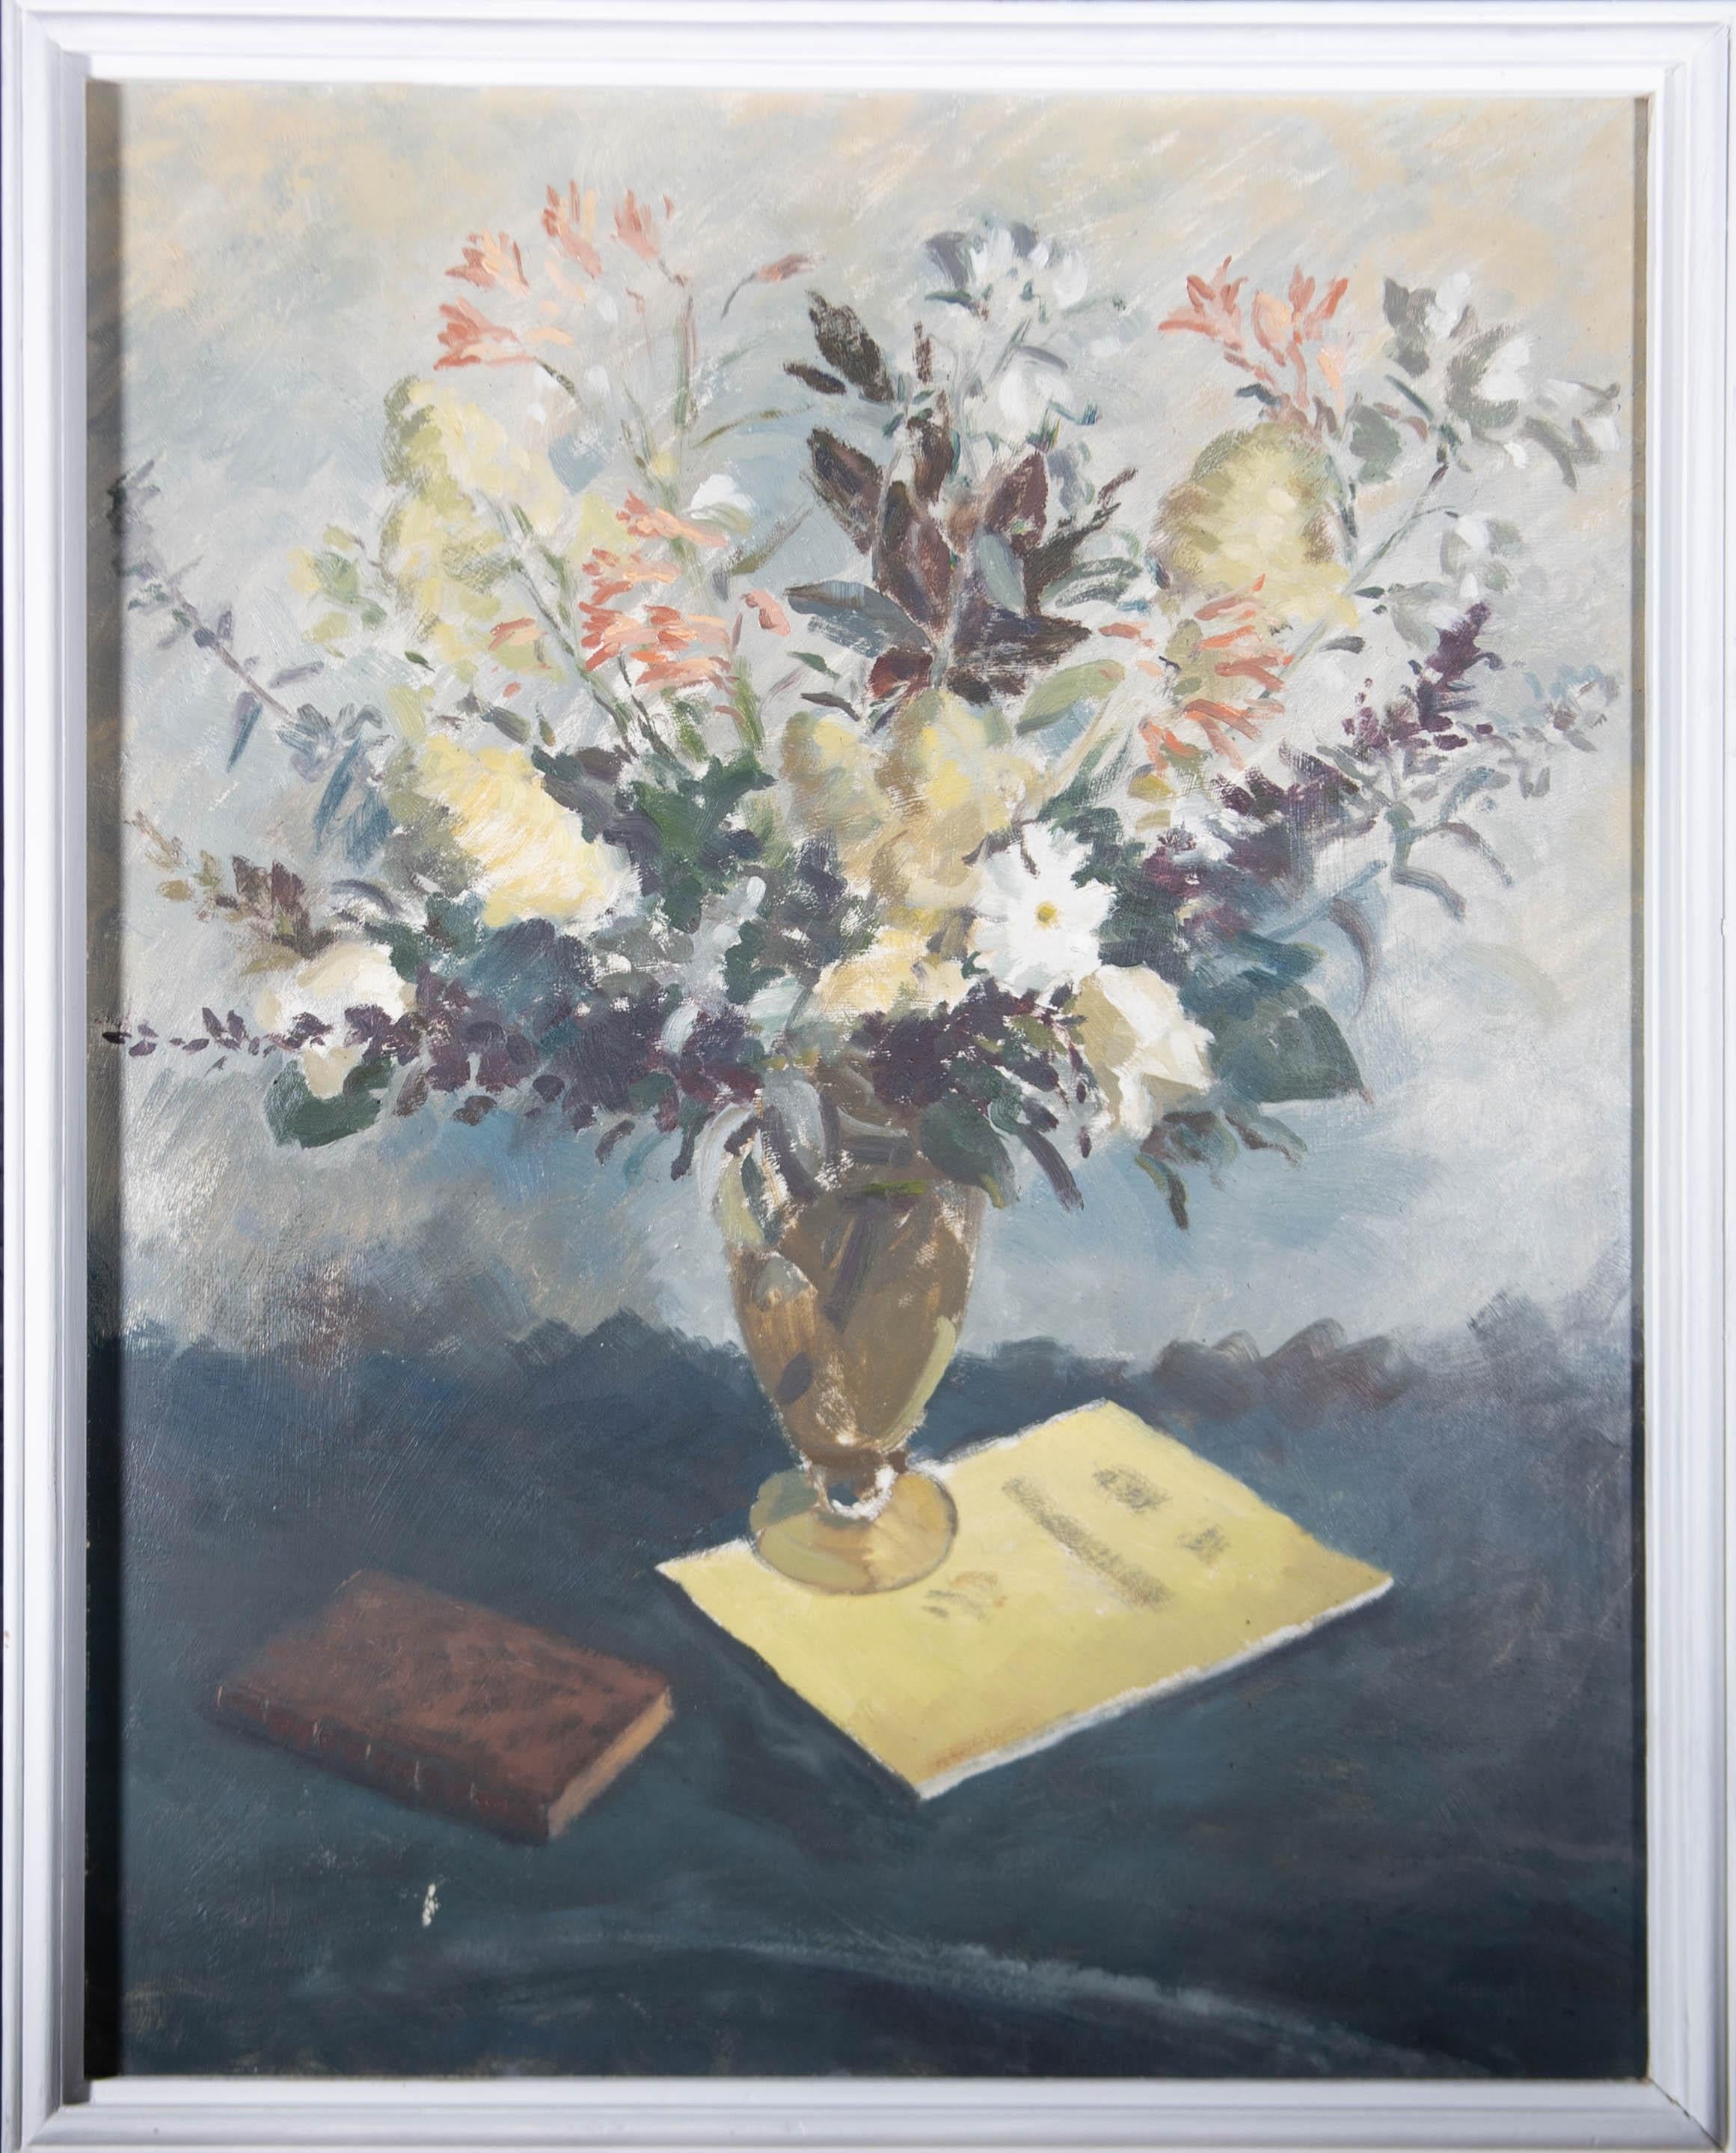 A visually appealing still life study of summer flowers by the British artist Thomas Henslow Barnard. With expressive brushwork and a delicate, natural palette. Presented in a distress-effect painted white frame. Handwritten label to the reverse